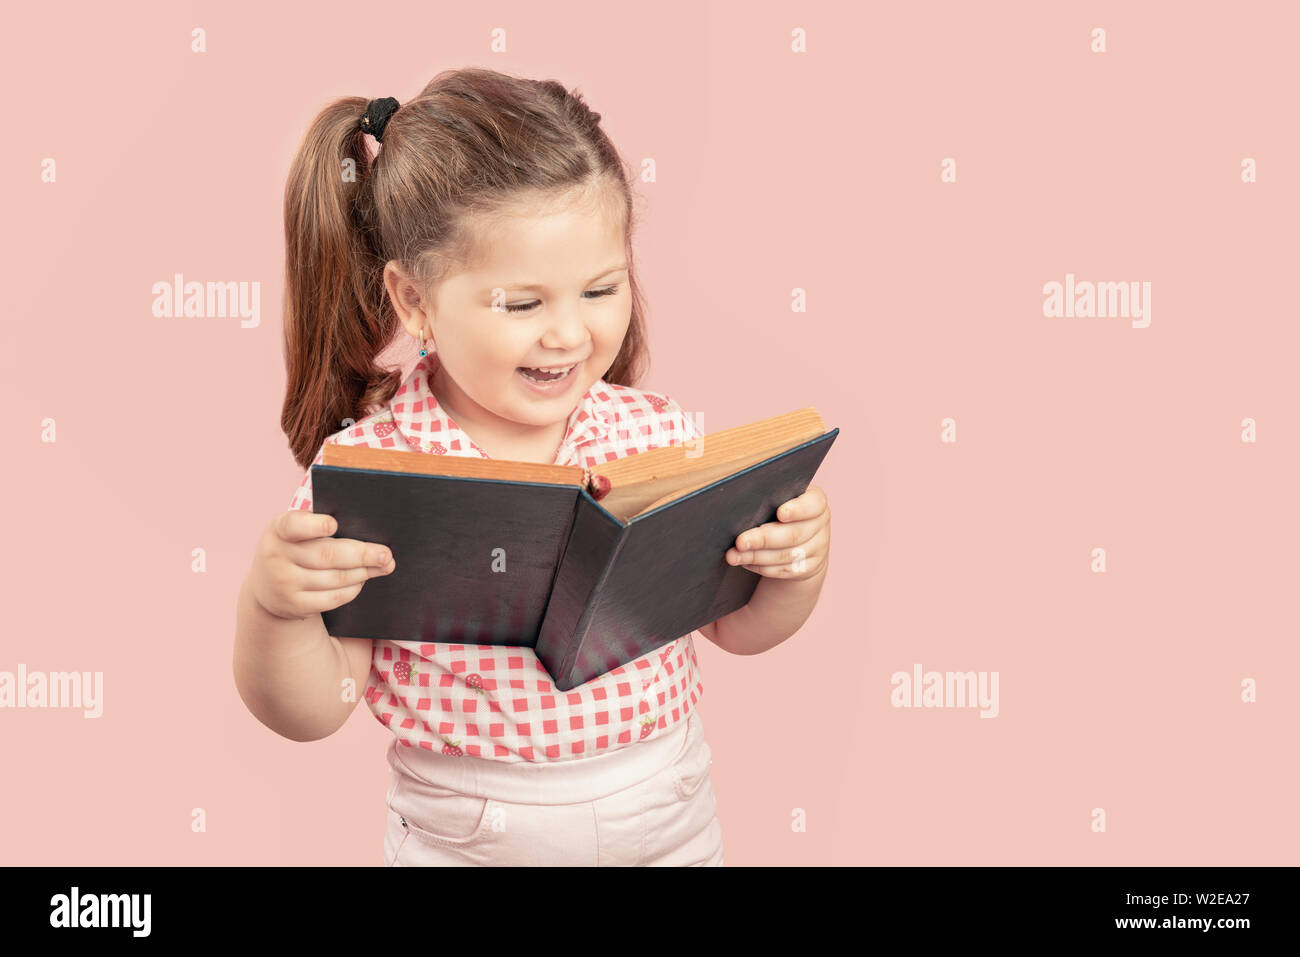 Little Cute Girl Reading Book And Smiling on Pink Background. Stock Photo